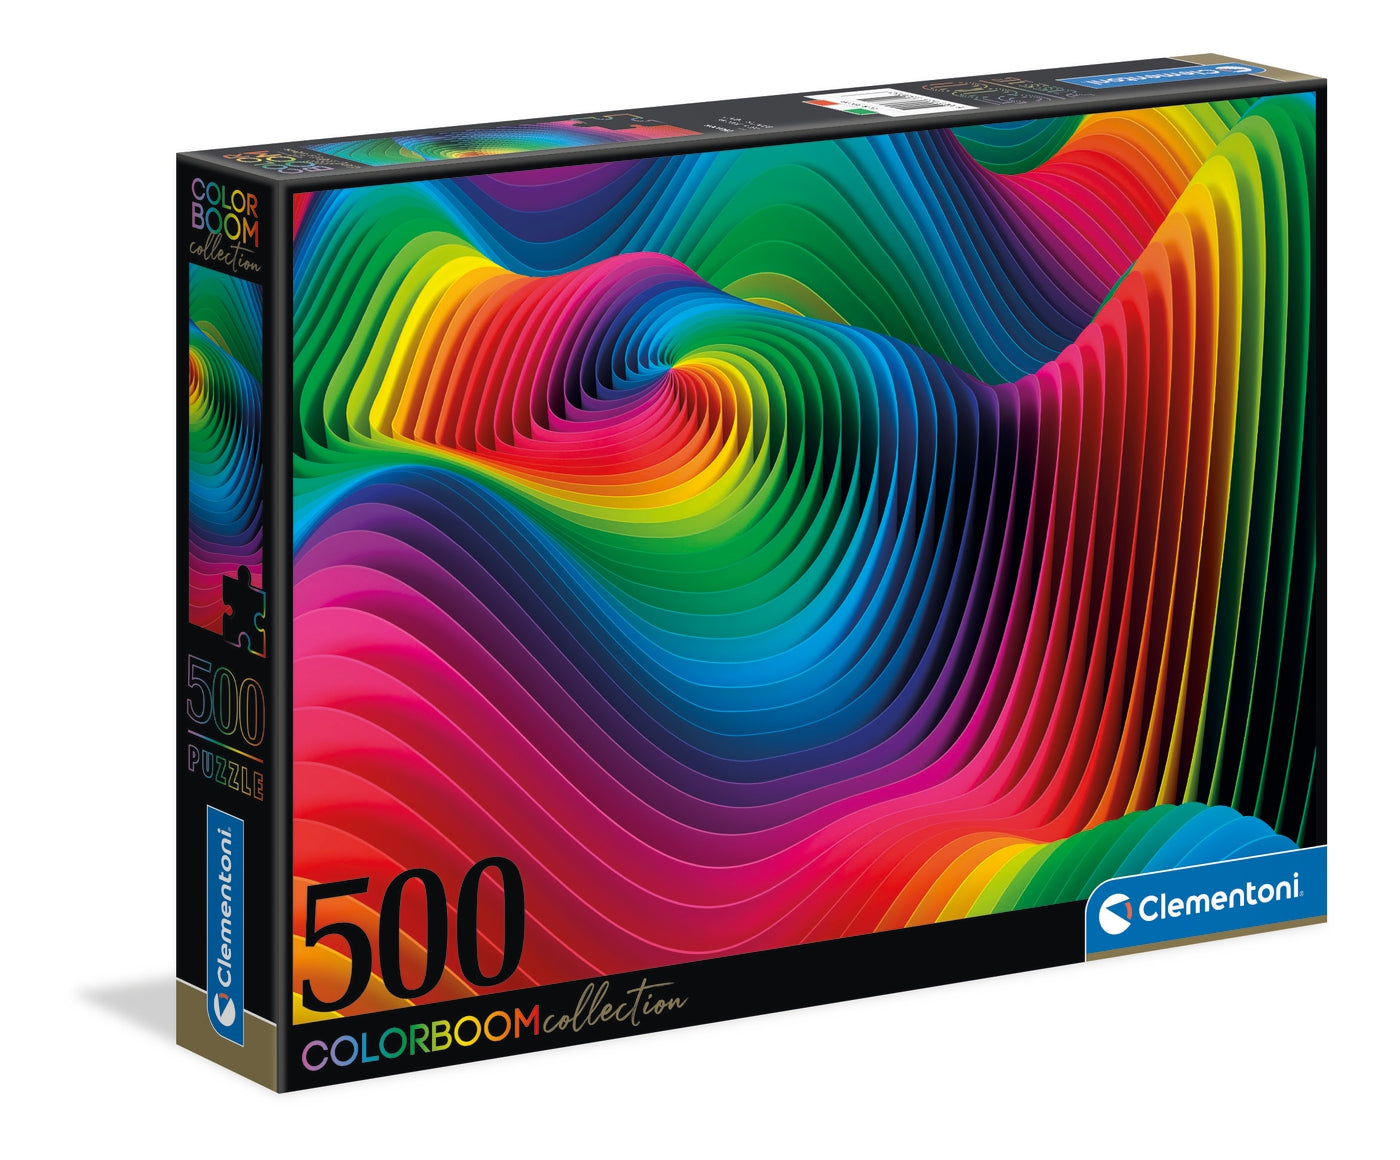 Colorboom Waves by Clementoni, 500 Piece Puzzle